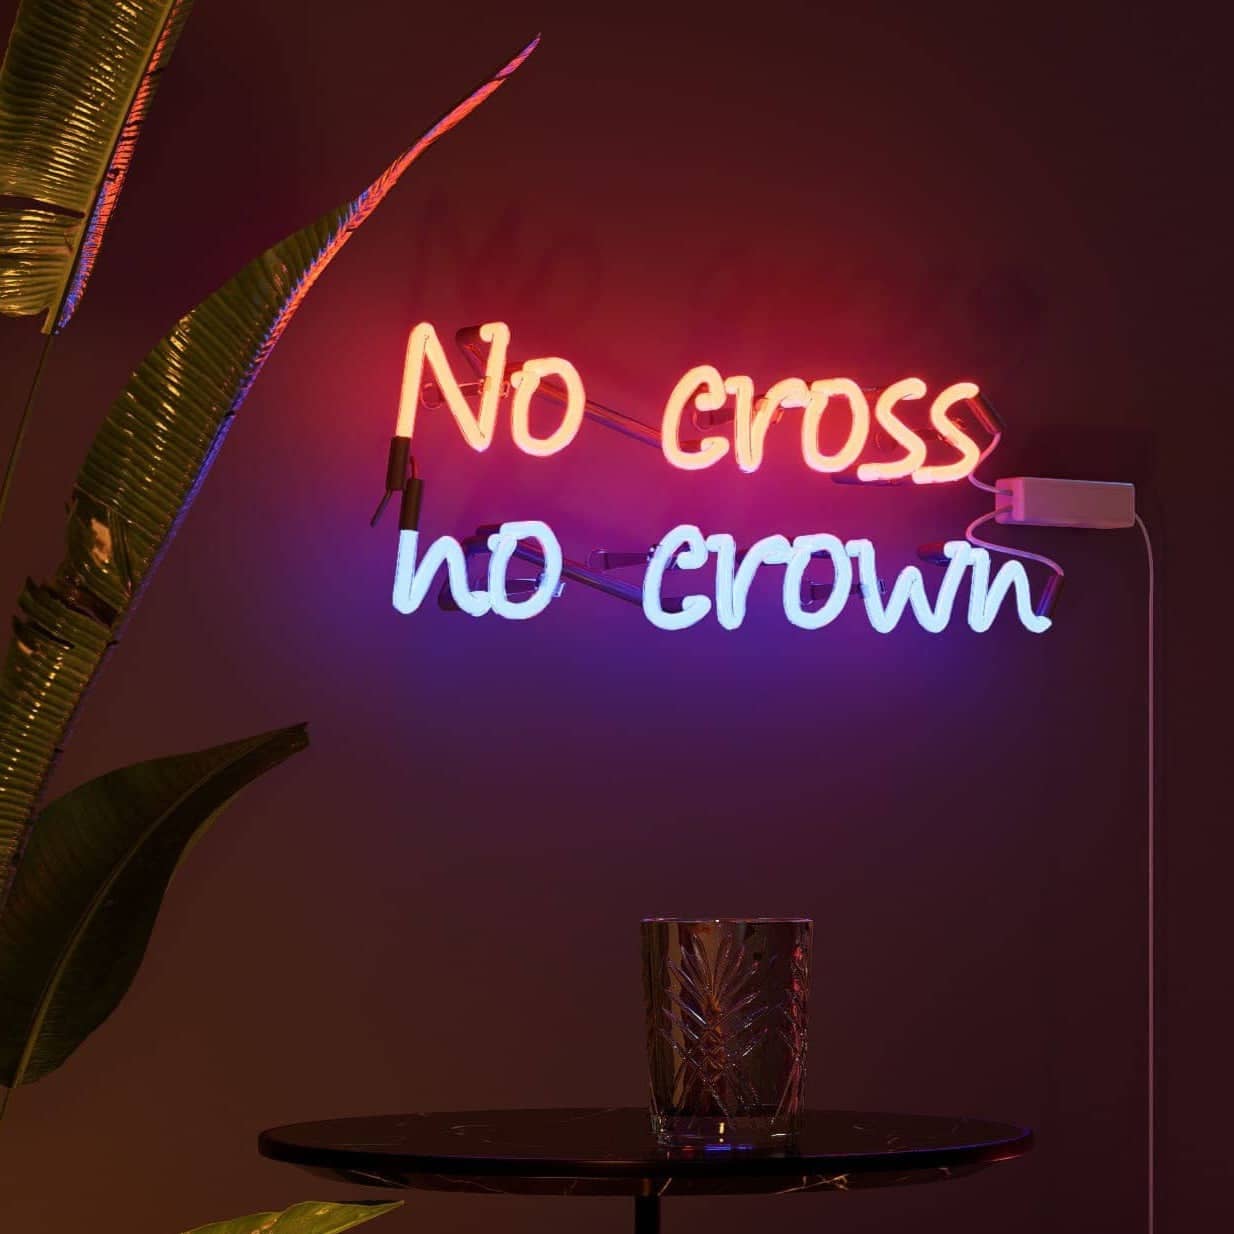 vintage-neon-signs-capture-the-essence-of-'no-cross,-no-crown'